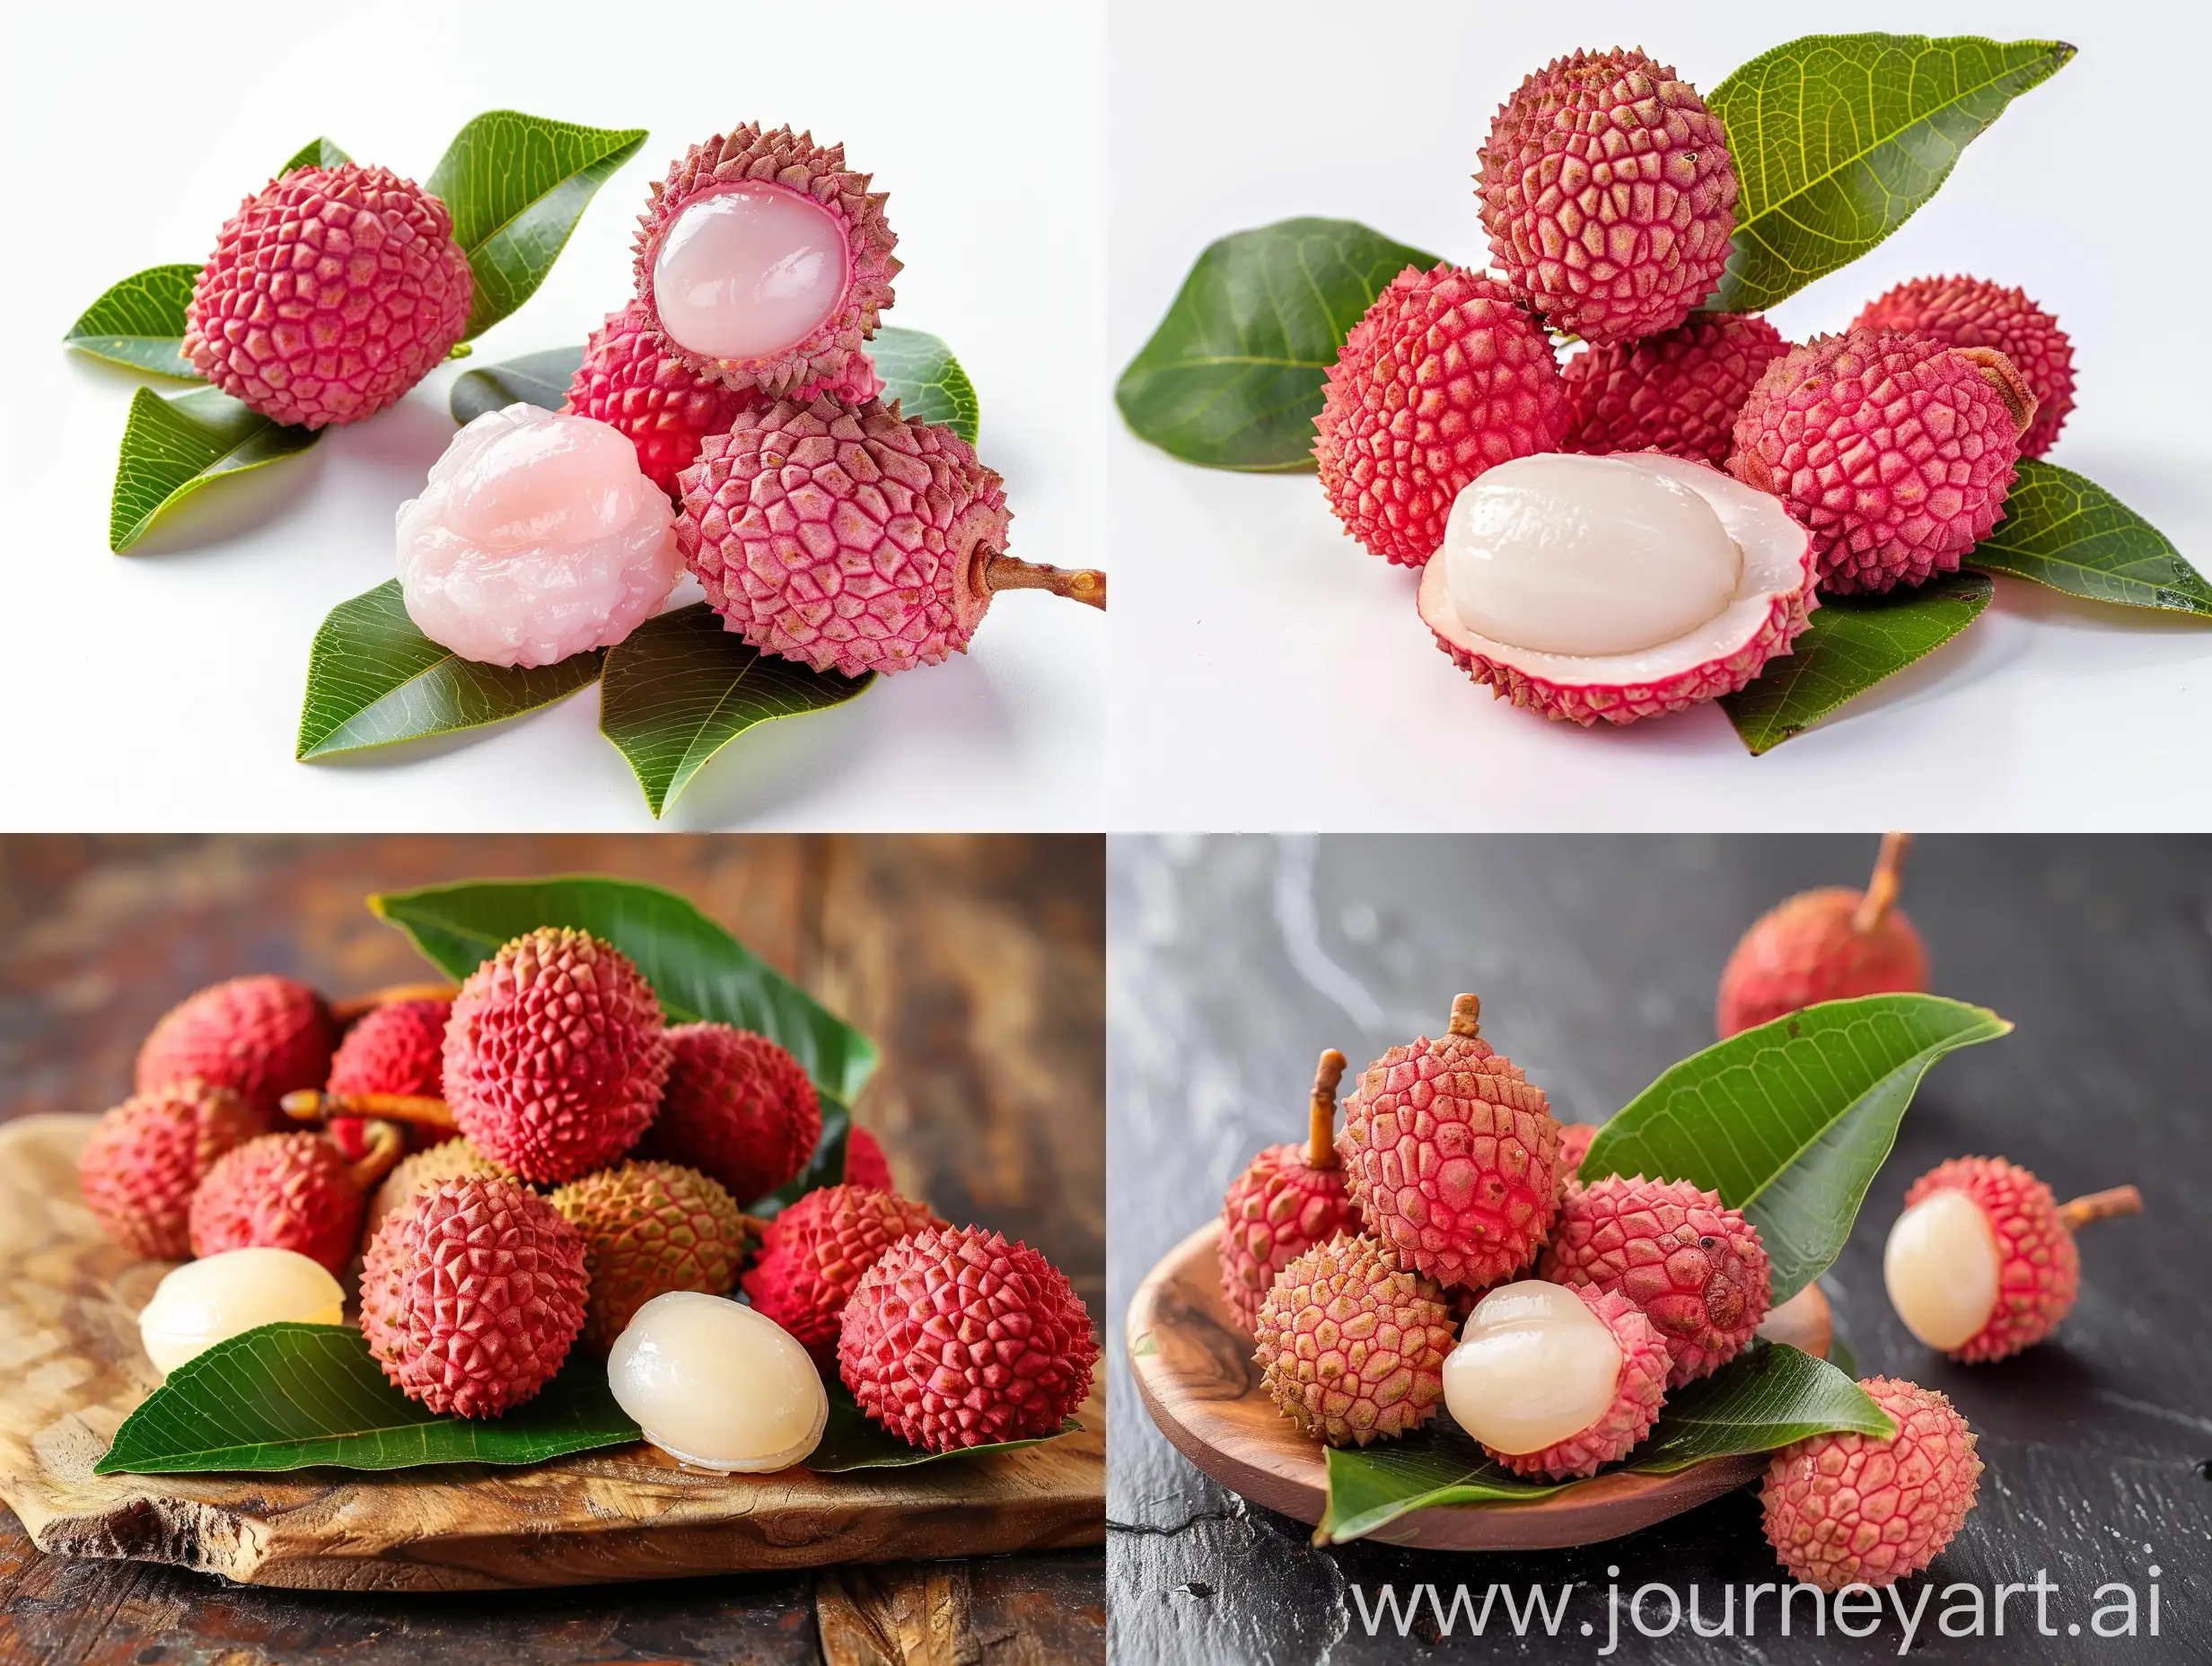 Fresh-and-Juicy-Lychee-Fruits-Vibrant-Advertisement-Image